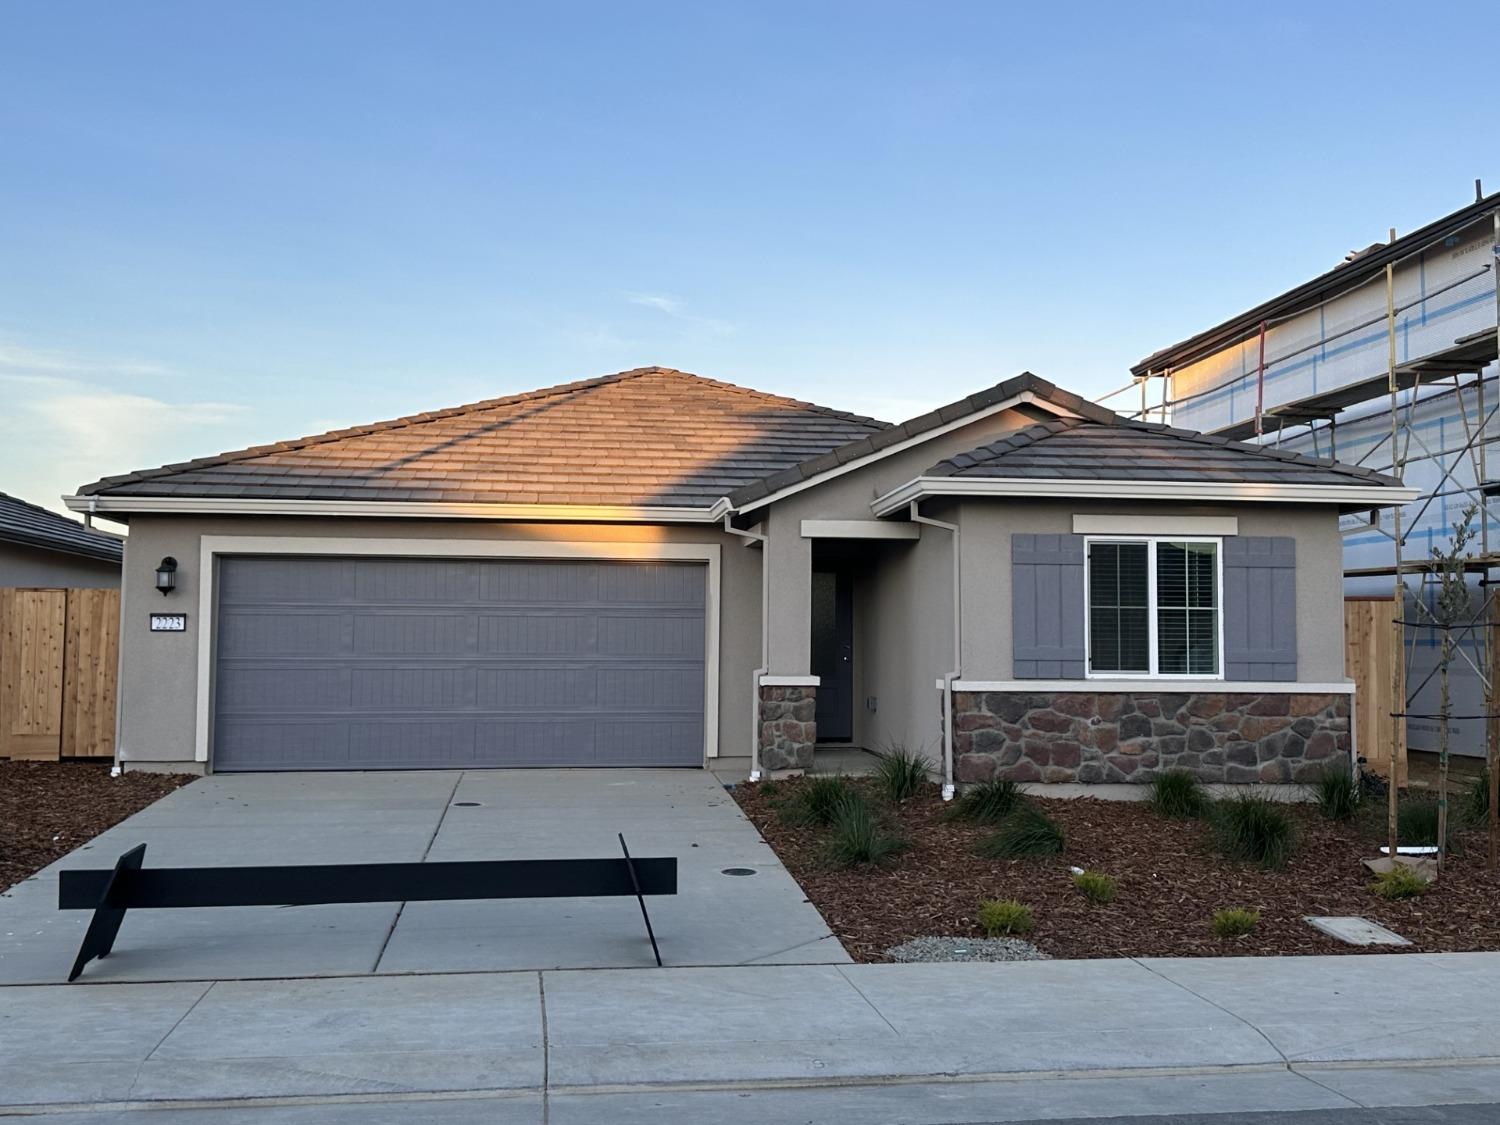 Photo of 2236 Sunshine Dr in Newman, CA